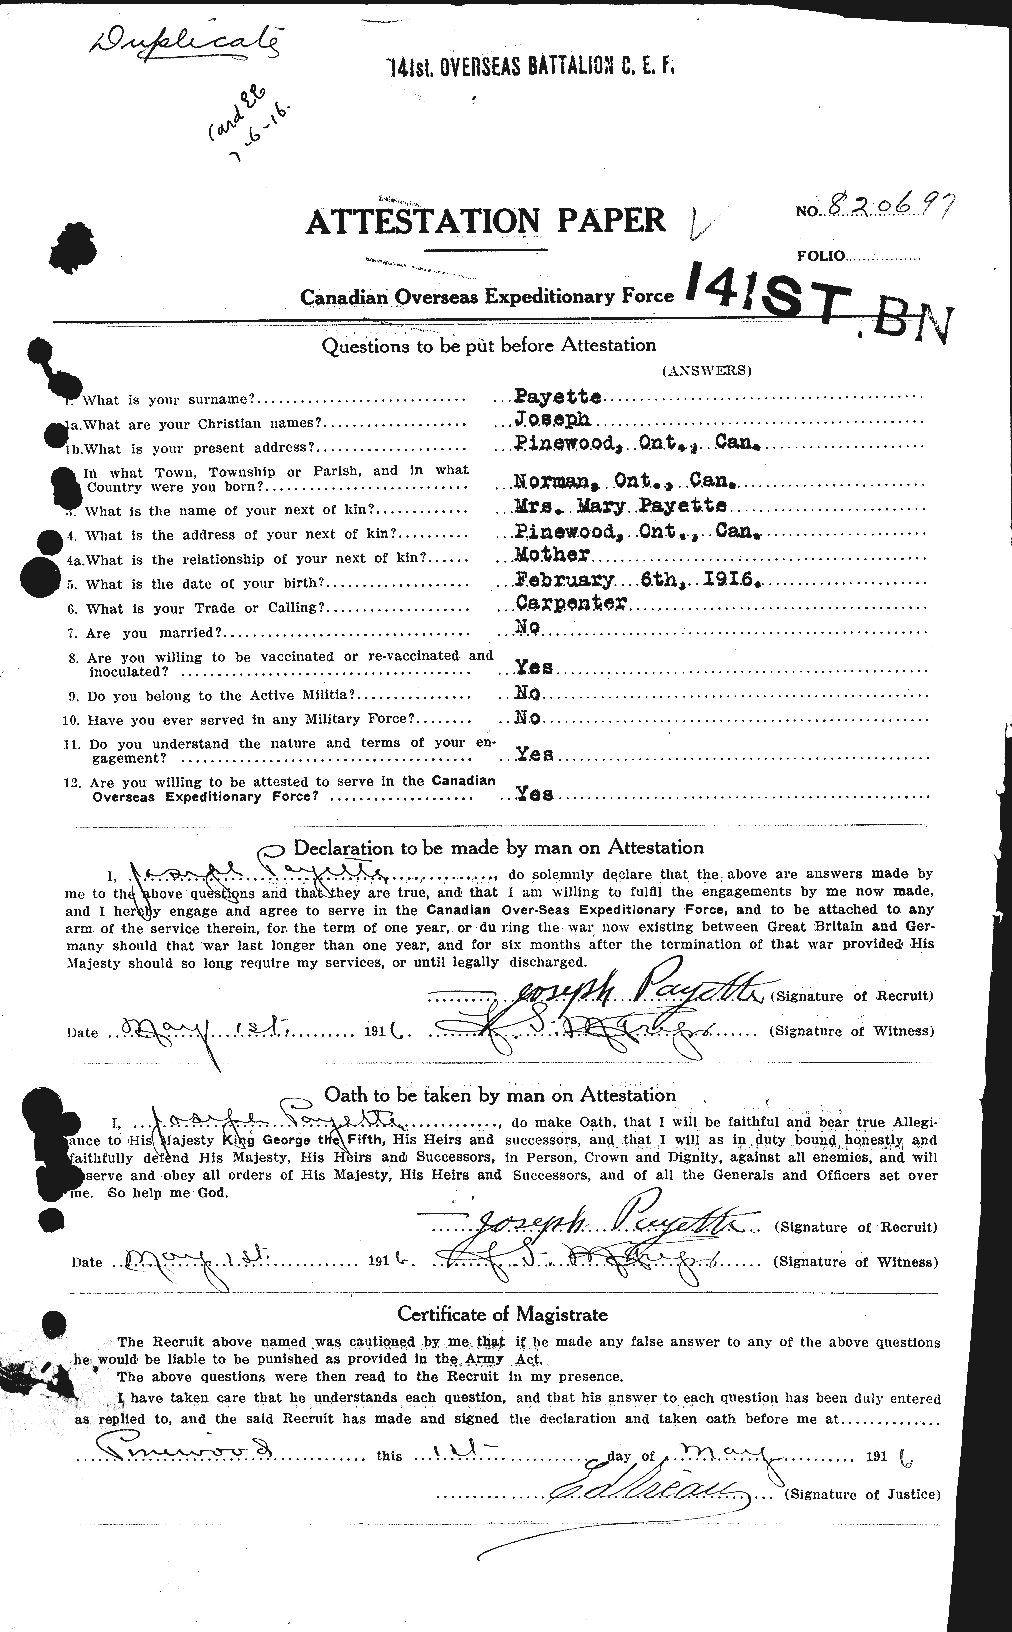 Personnel Records of the First World War - CEF 569750a